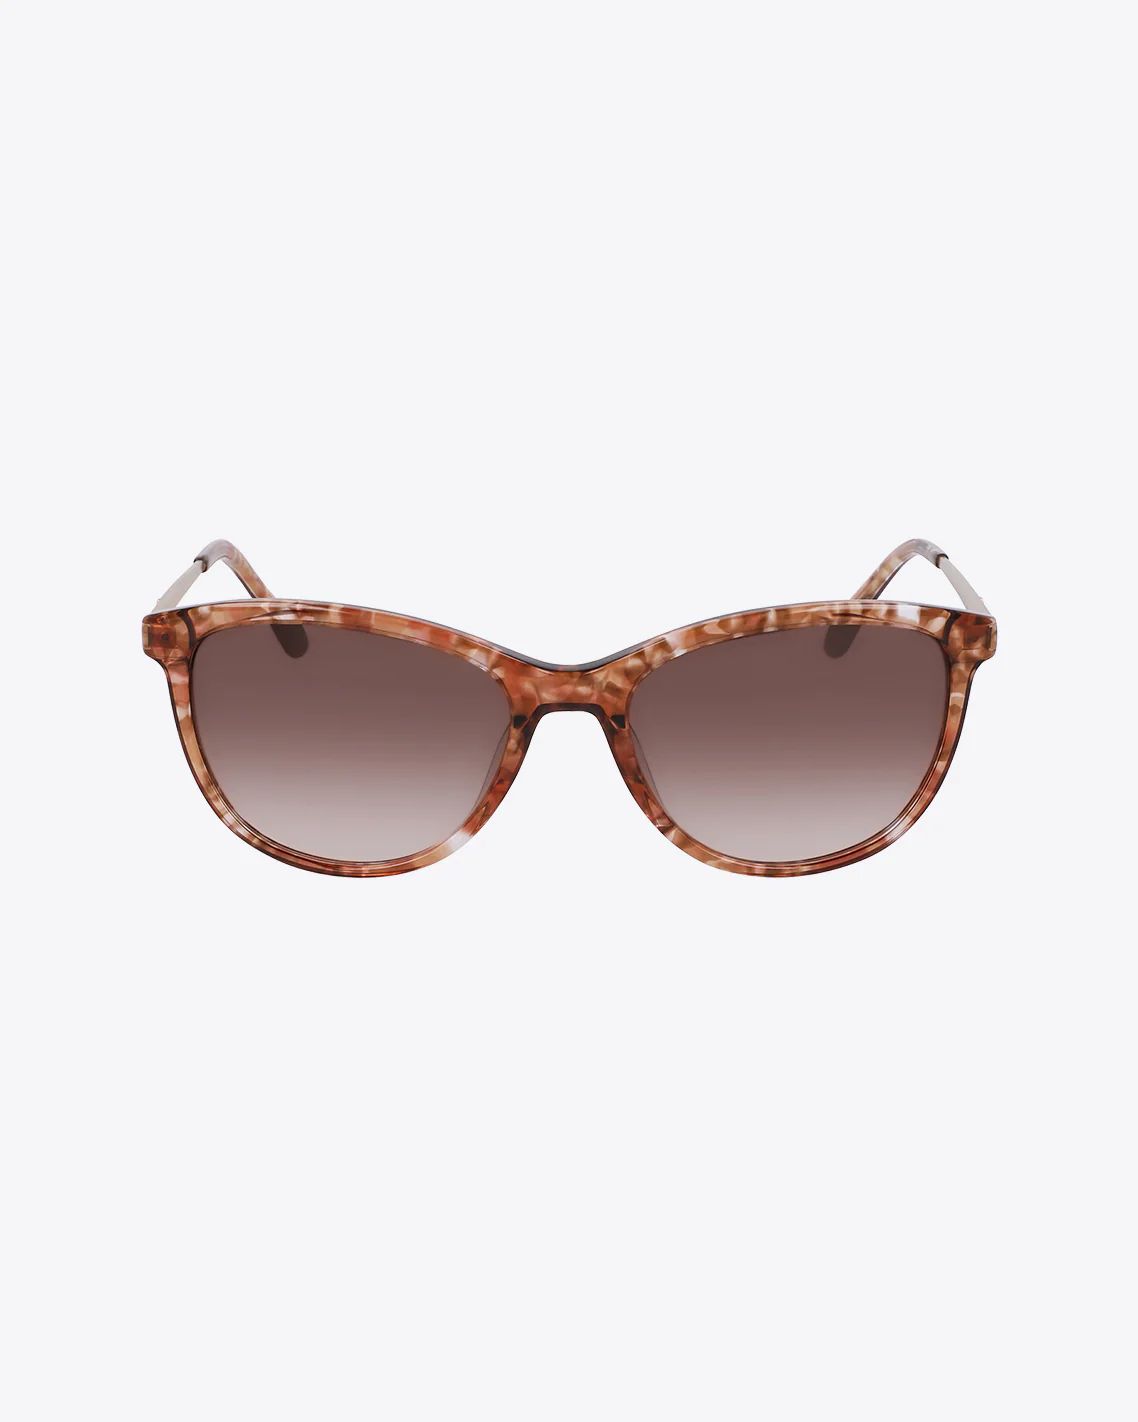 Robin Sunglasses in Taupe Floral | Draper James (US)